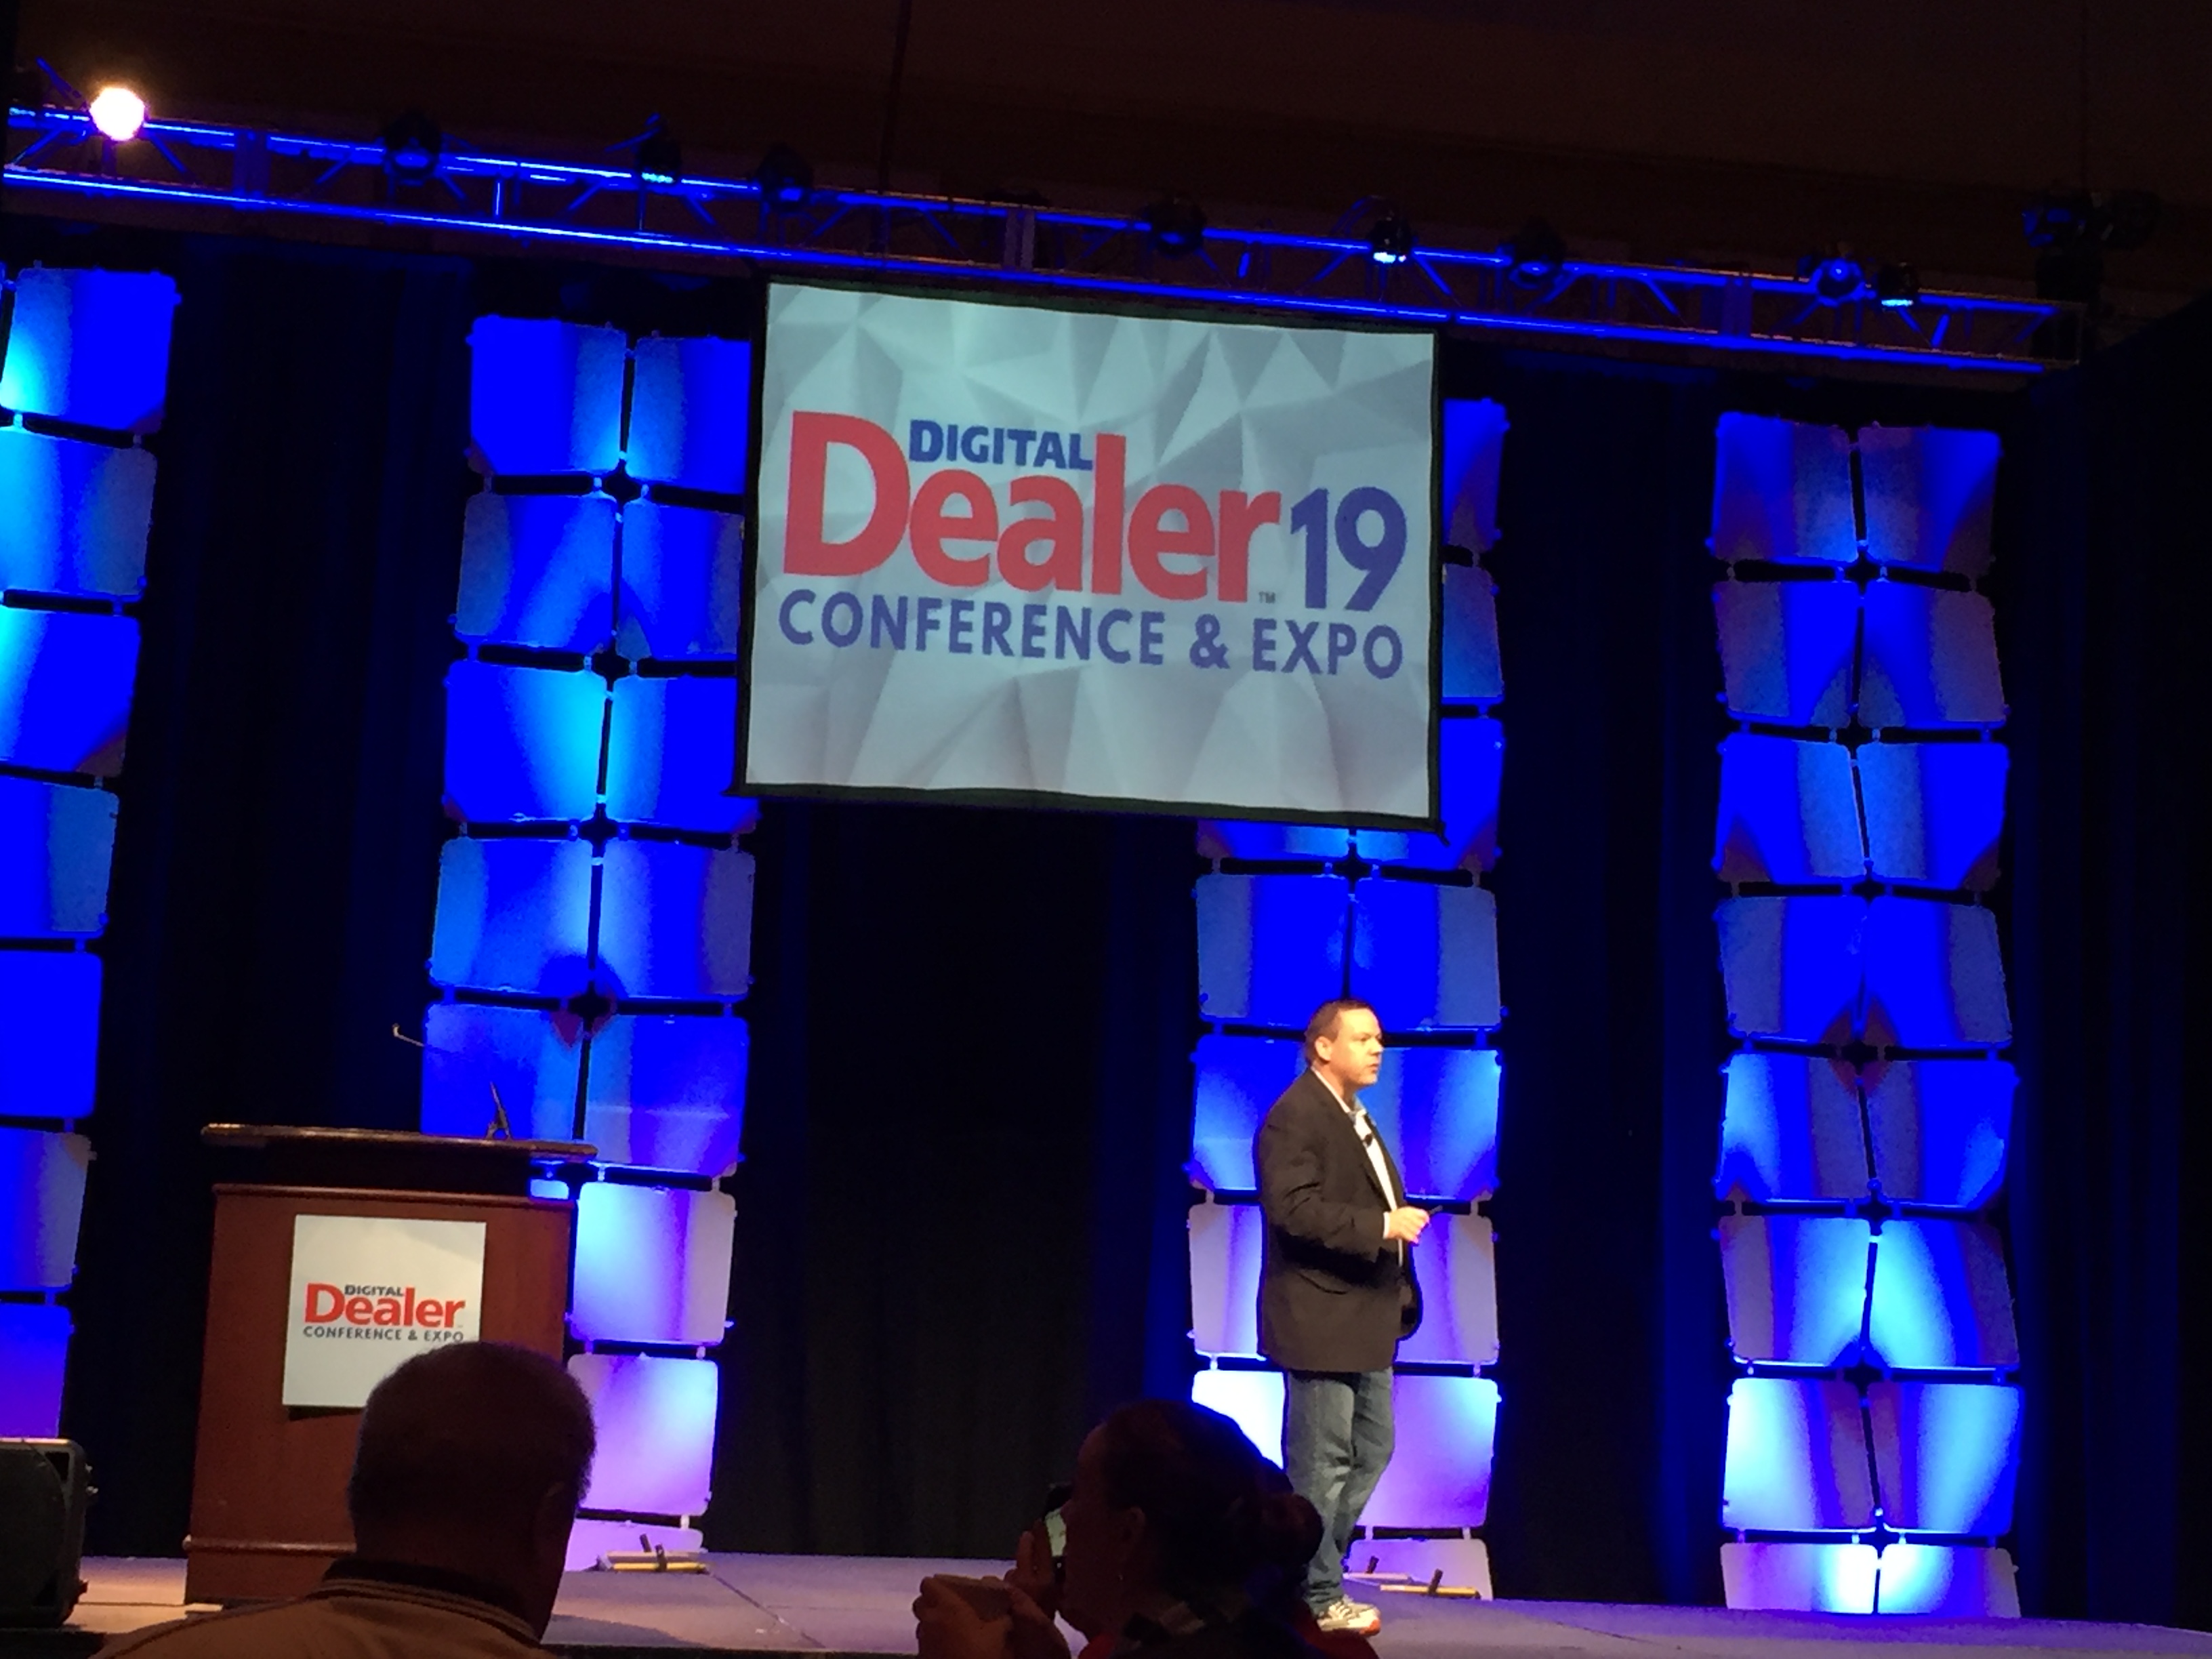 Is he famous? He must be - Famous Rhodes shares powerful insight during the final DD19 keynote